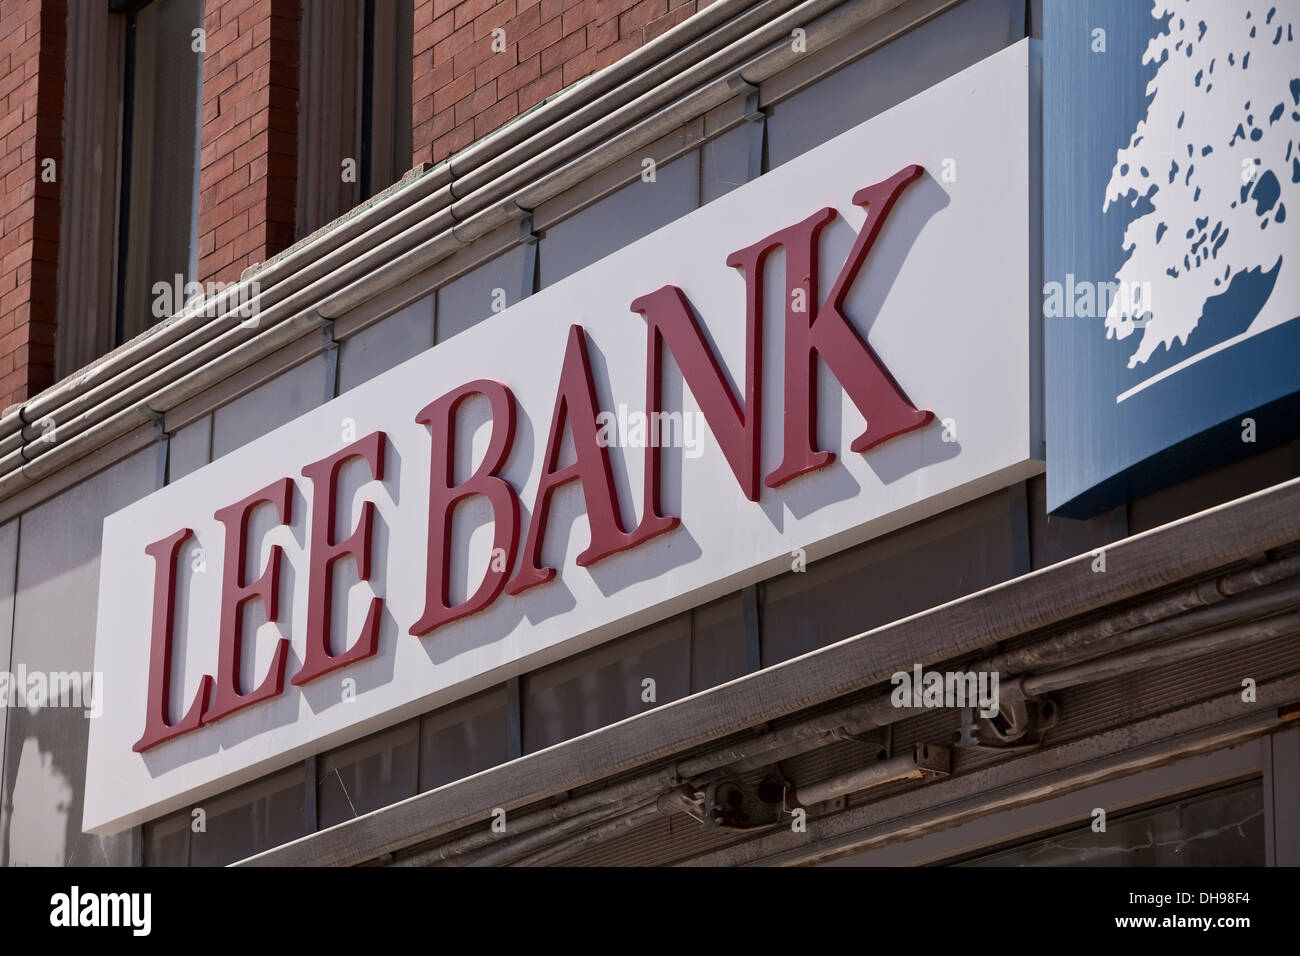 A Lee Bank branch is pictured in Pittsfield, Massachusetts Stock Photo -  Alamy